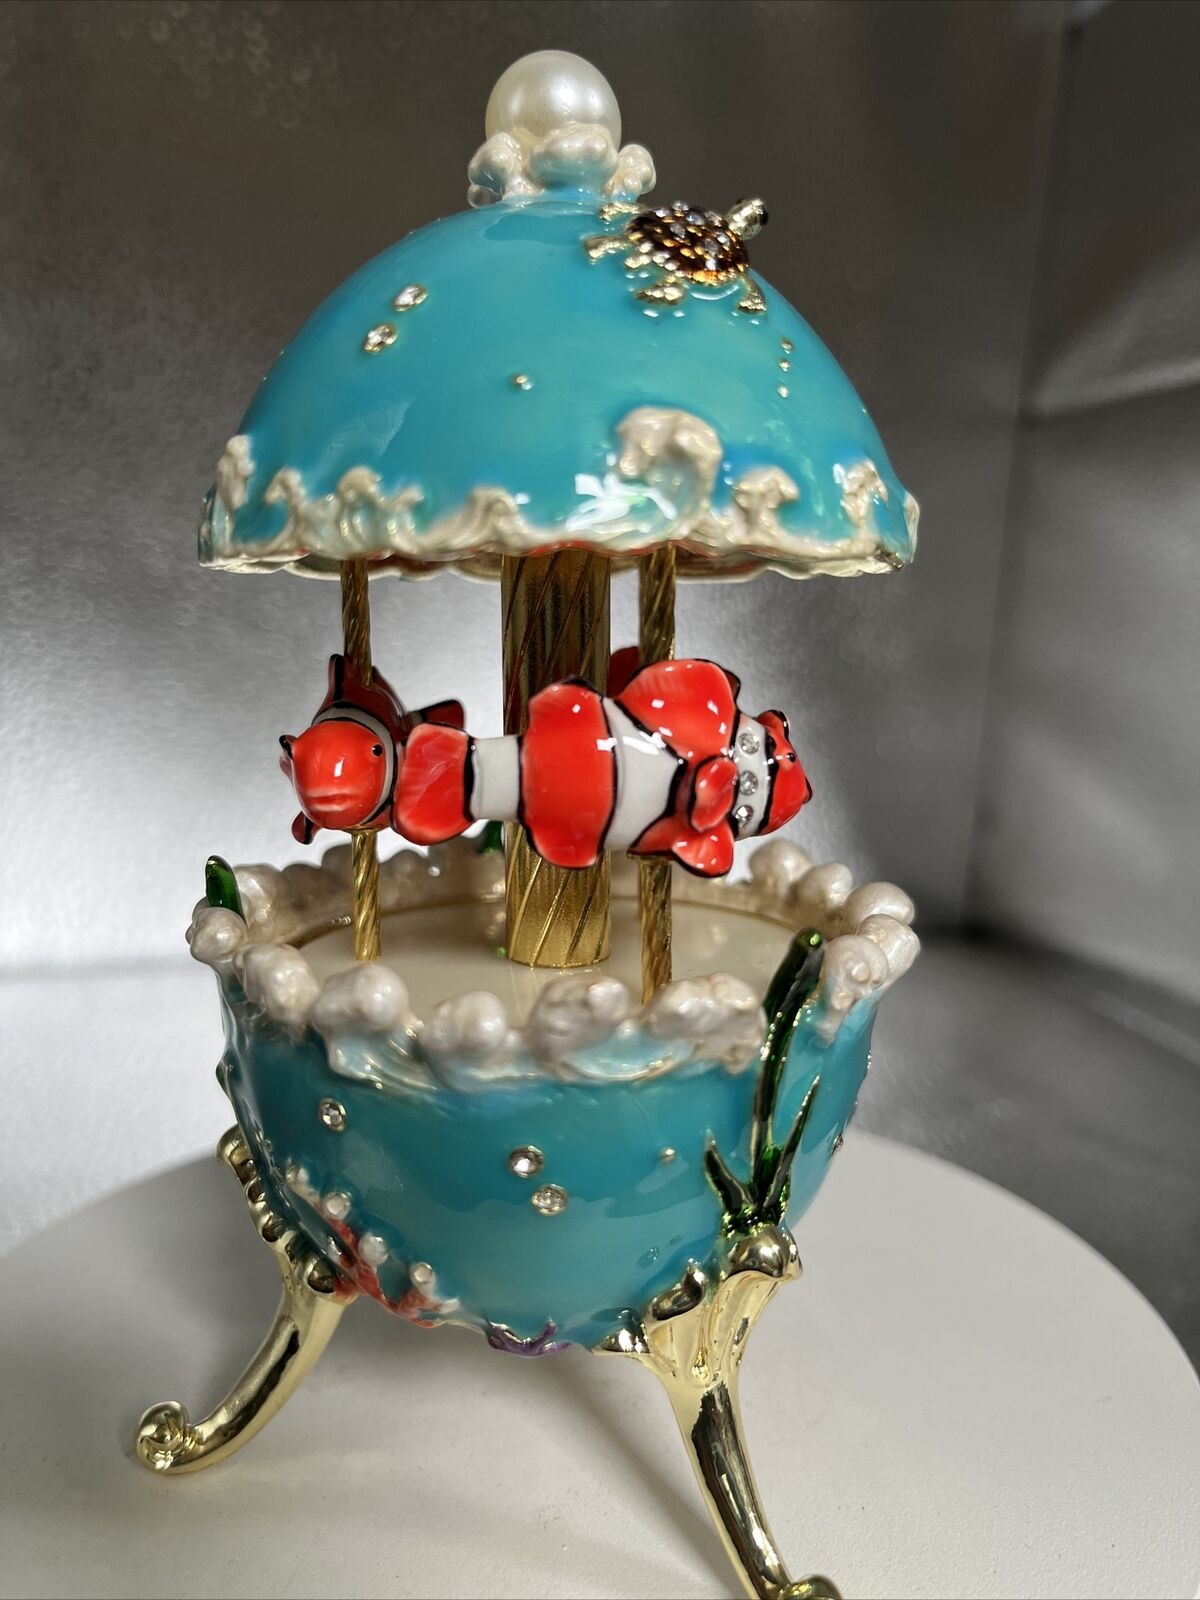 TURQUOIS  MUSICAL CAROUSEL FABERGE  WITH CLOWN FISH BY KEREN KOPAL, VERY RARE